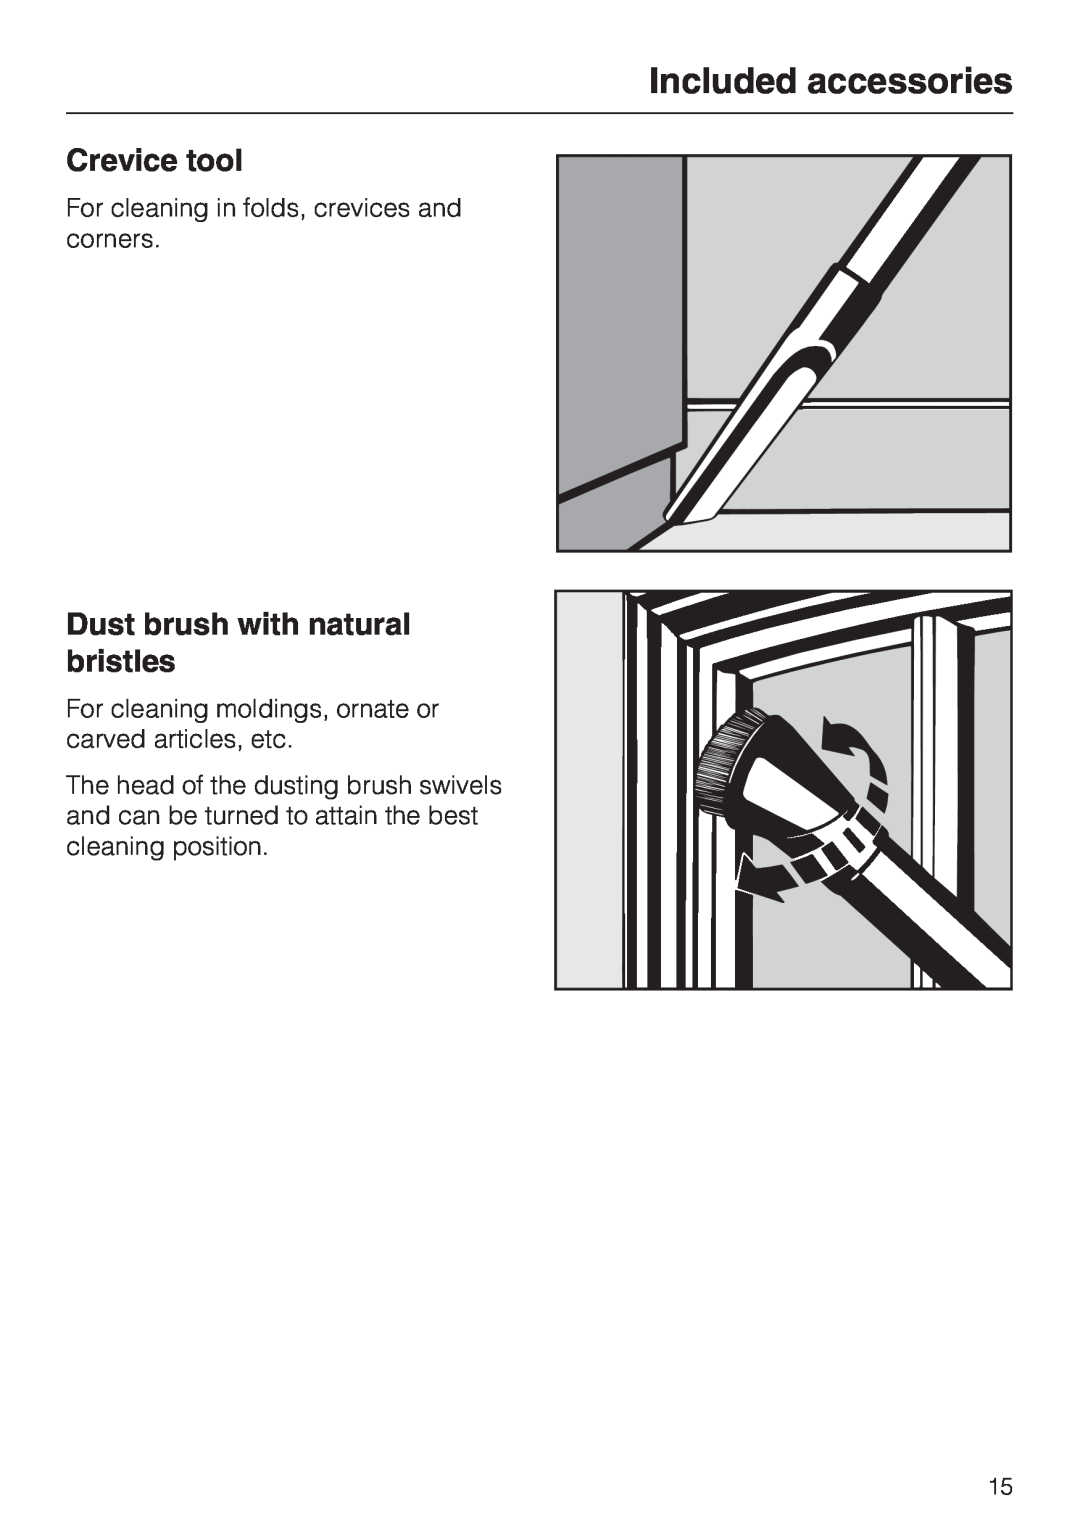 Miele S5981 operating instructions Crevice tool, Dust brush with natural bristles, Included accessories 